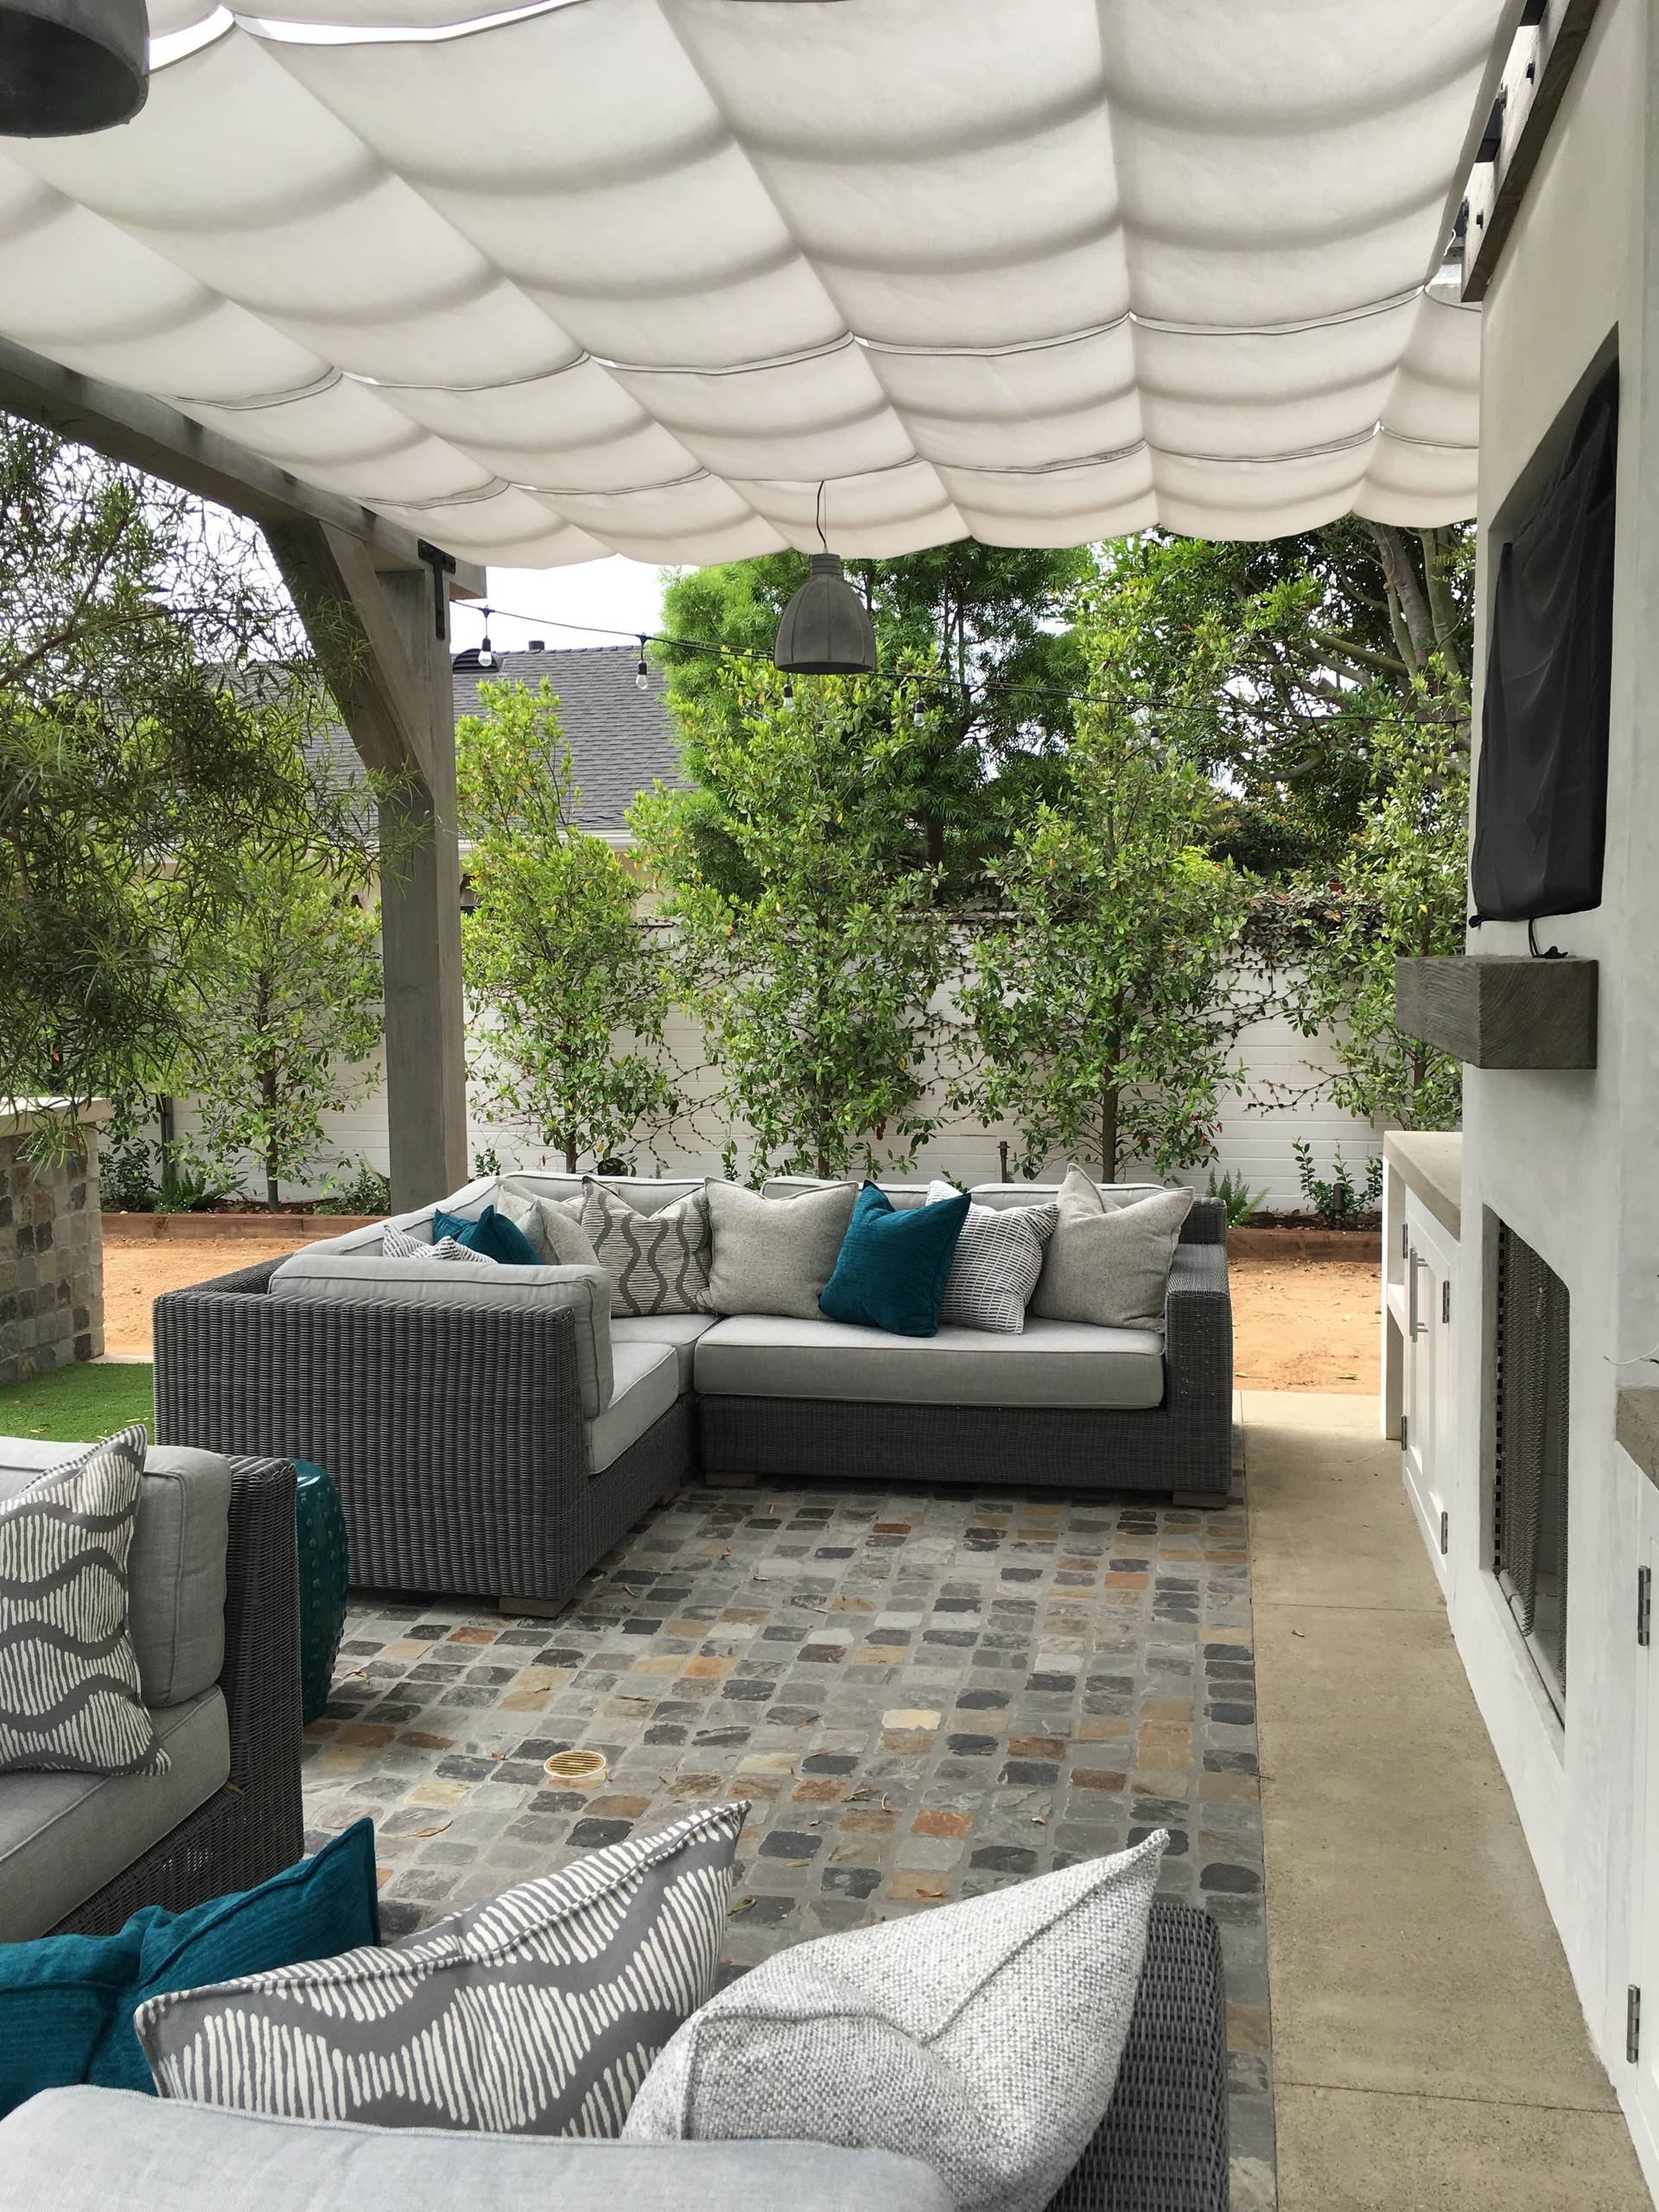 75 Beautiful Patio Awning Pictures & Ideas | Houzz